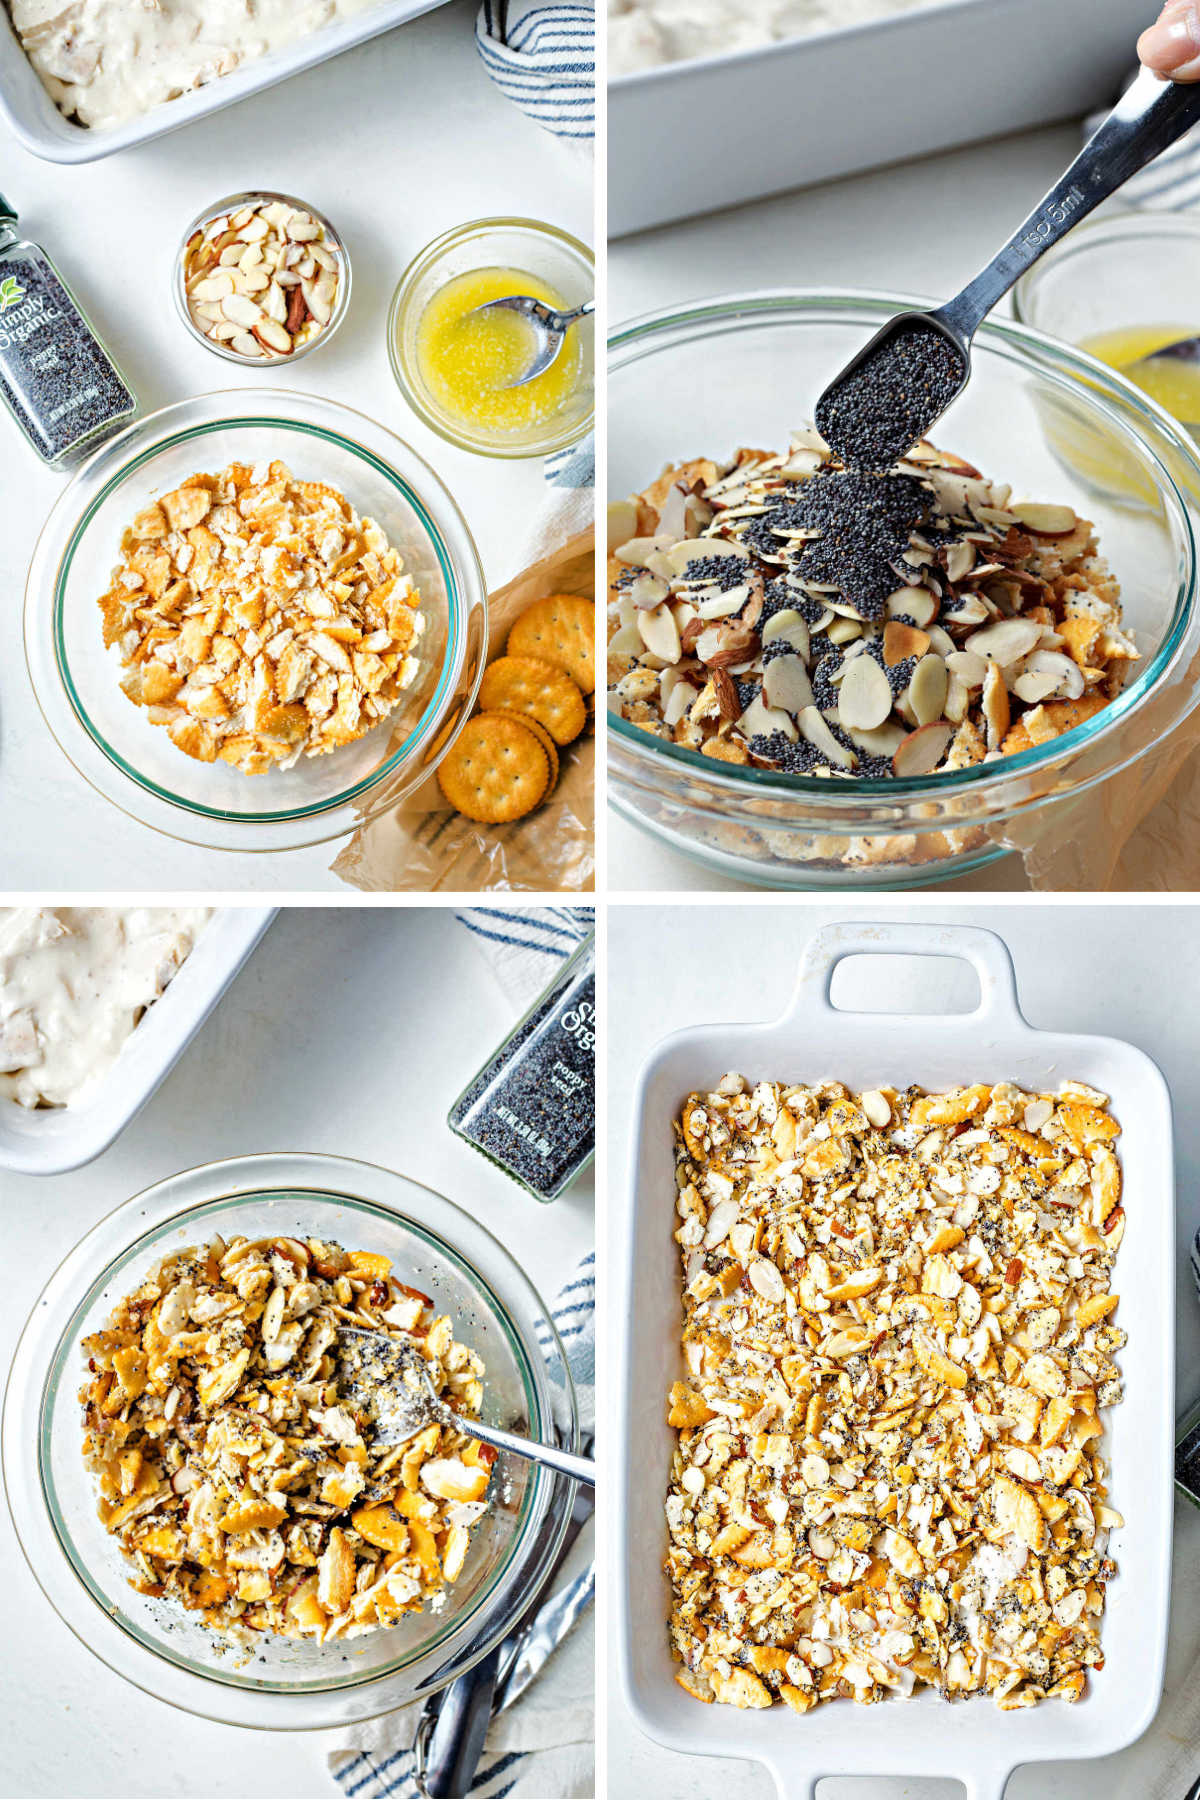 process steps for making crumb topping for chicken poppy seed casserole: stir together cracker crumbs, almonds, and poppy seeds.